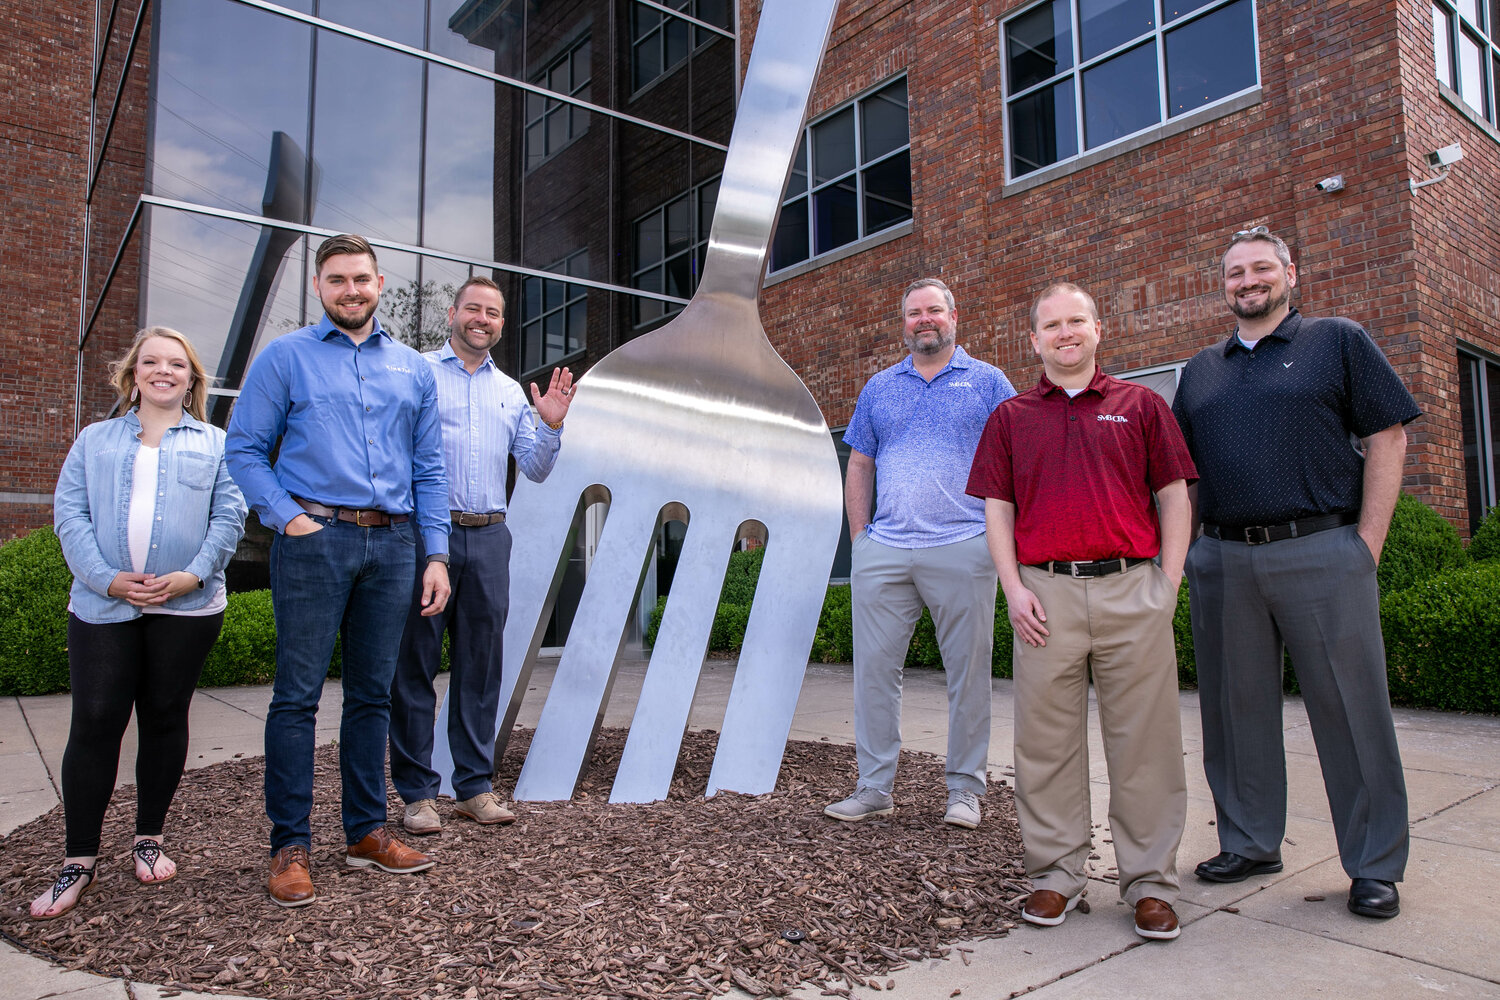 Kinetic Design leaders, from left, Abbye Bobbett, Griffin Bobbett and Adam Kreher stand with SMB partners Jacob Sanders, Matthew Blackwell and Chris Myers at the building the companies purchased together.